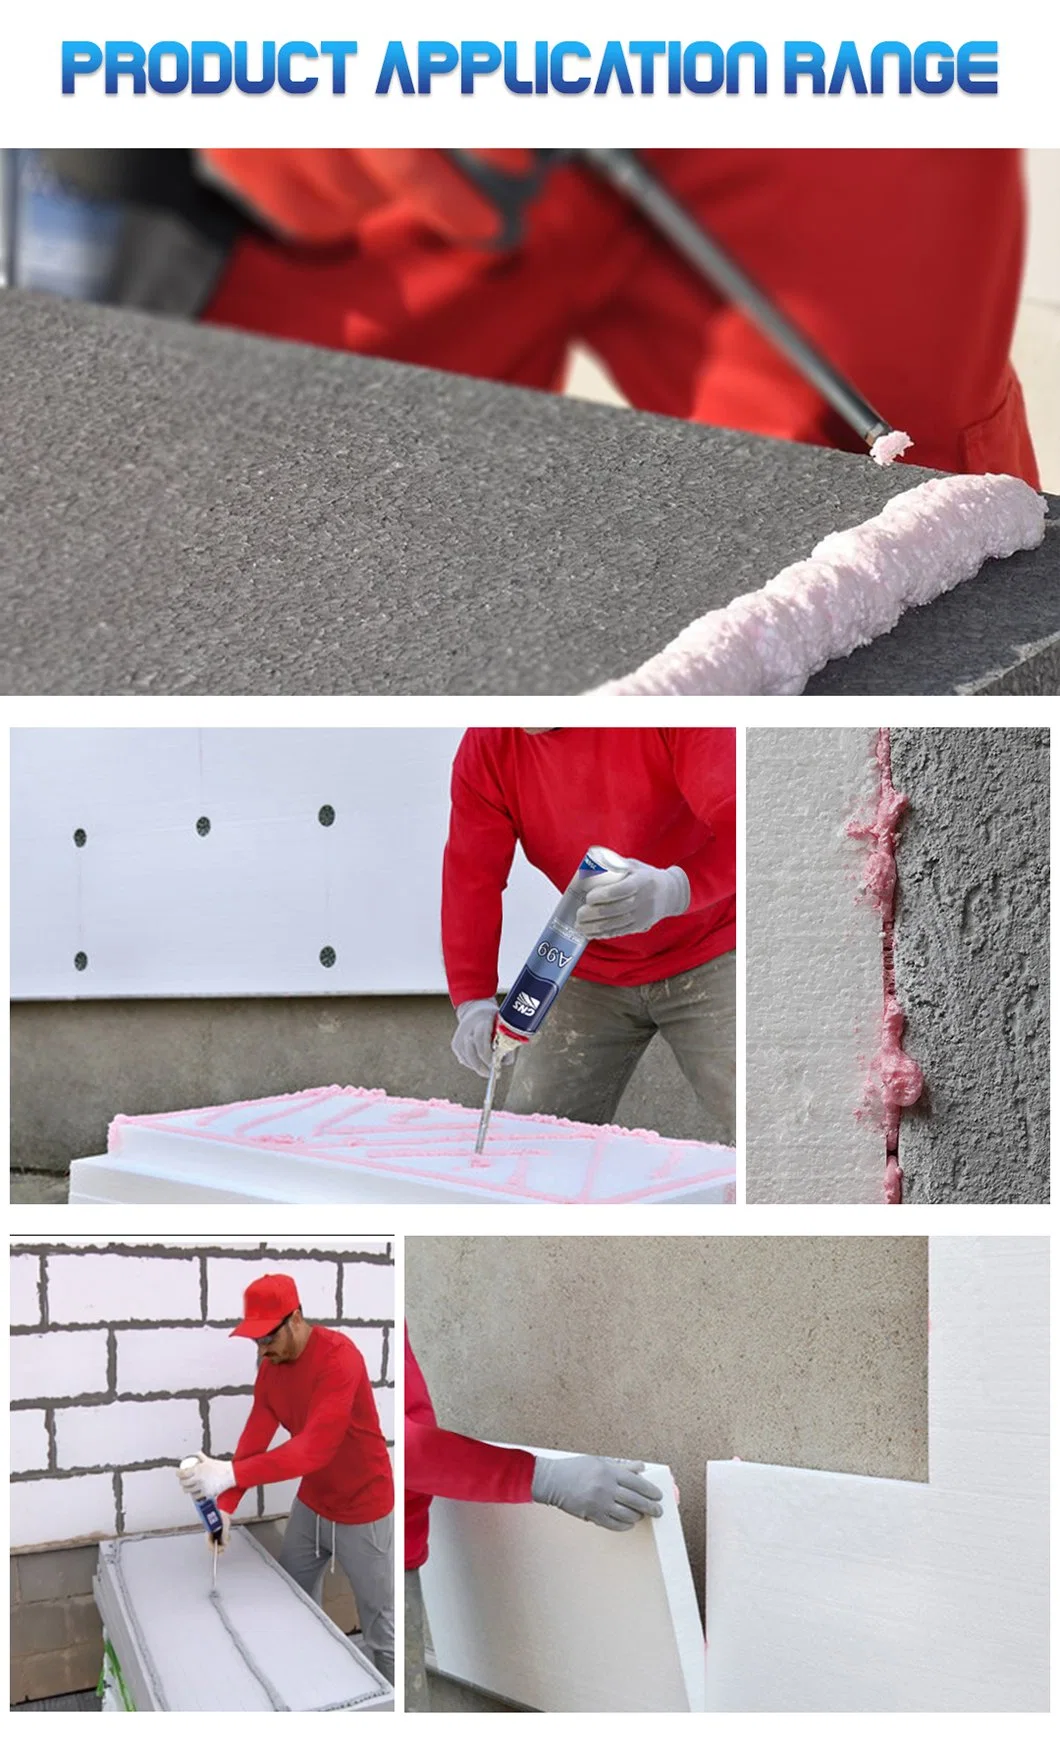 A99 Low Expansion Adhesive PU Foam for Mounting and Bonding